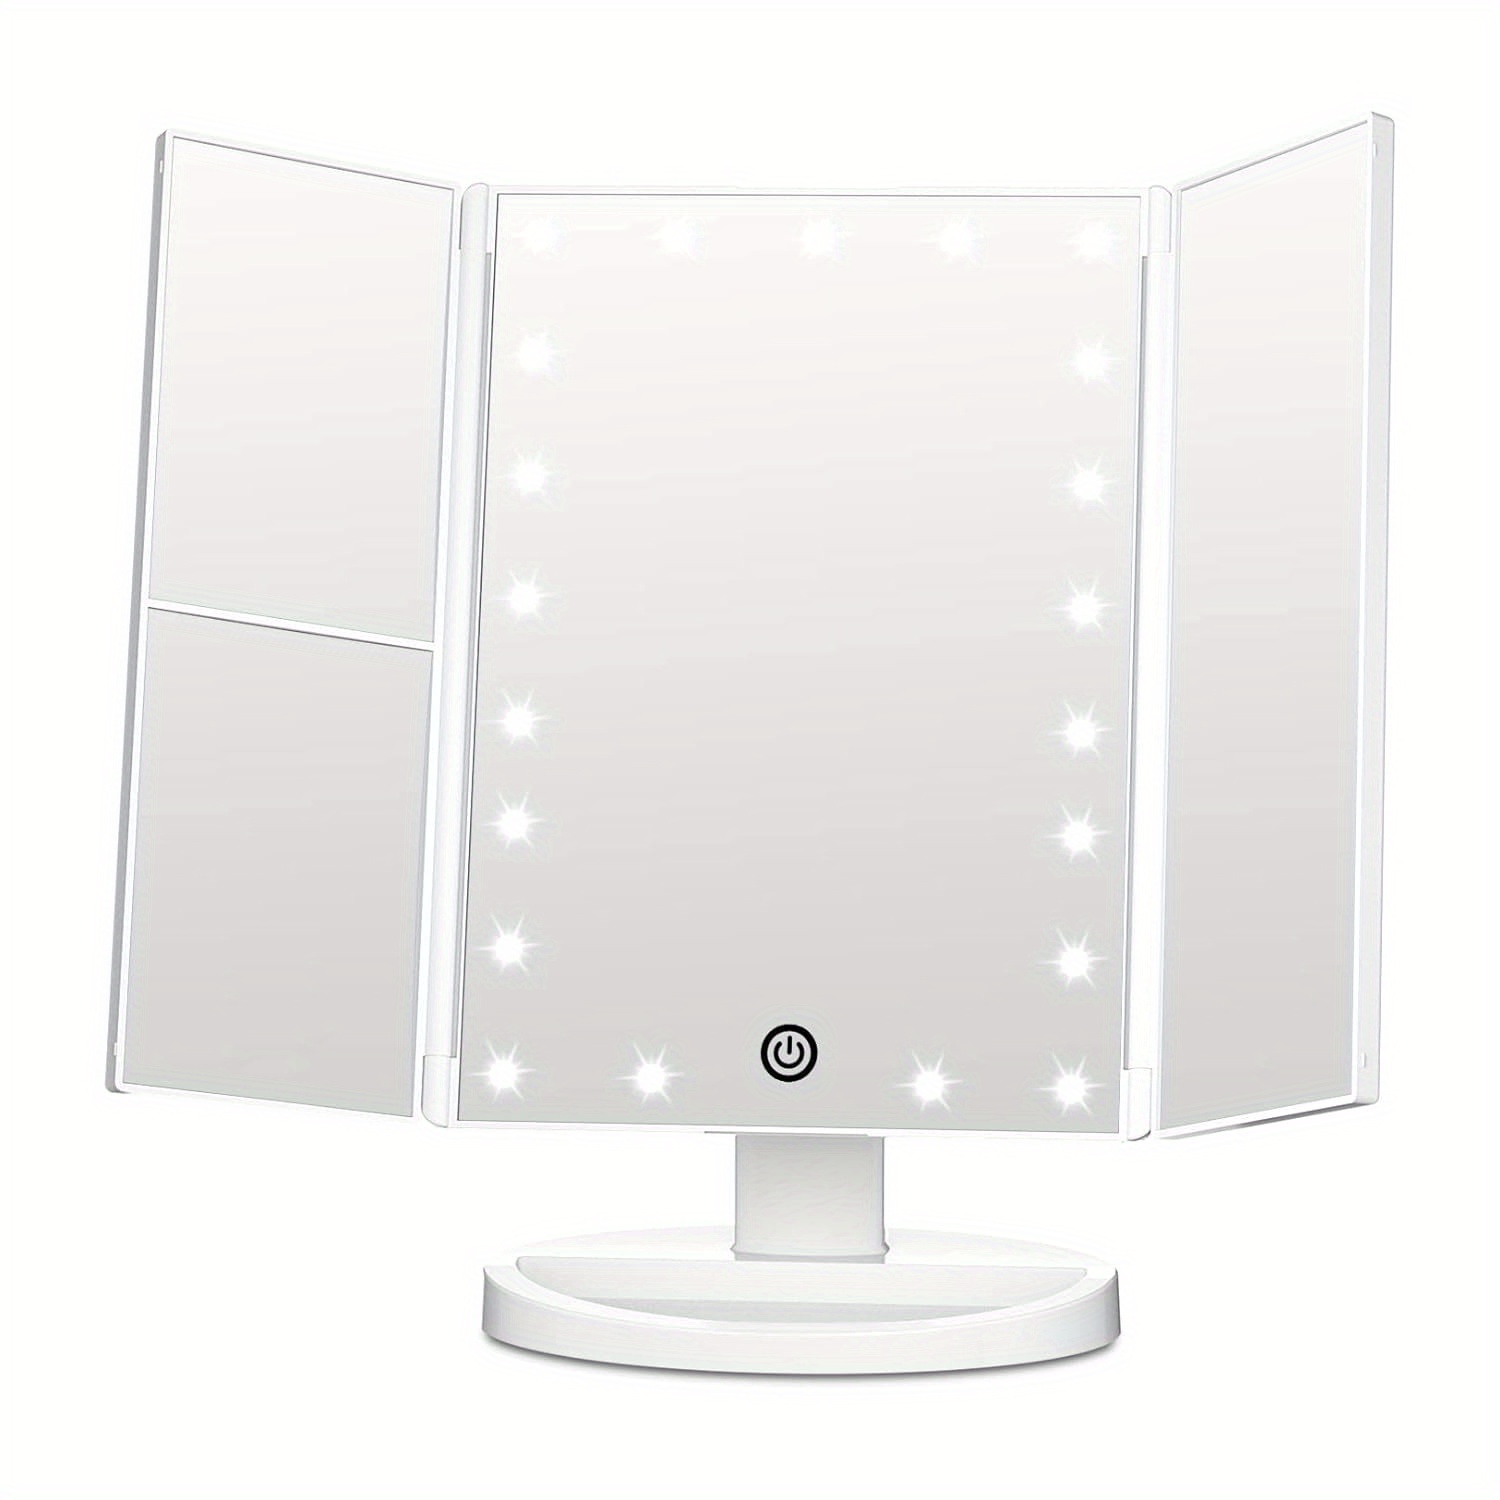 

Funtouch Trifold Vanity Mirror With Lights, Lighted Makeup Mirror 2x/ 3x Magnification, Touch Dimming, Dual Power 180° Rotation Lit Beauty Table Mirror, Make Up Mirror With Lighting